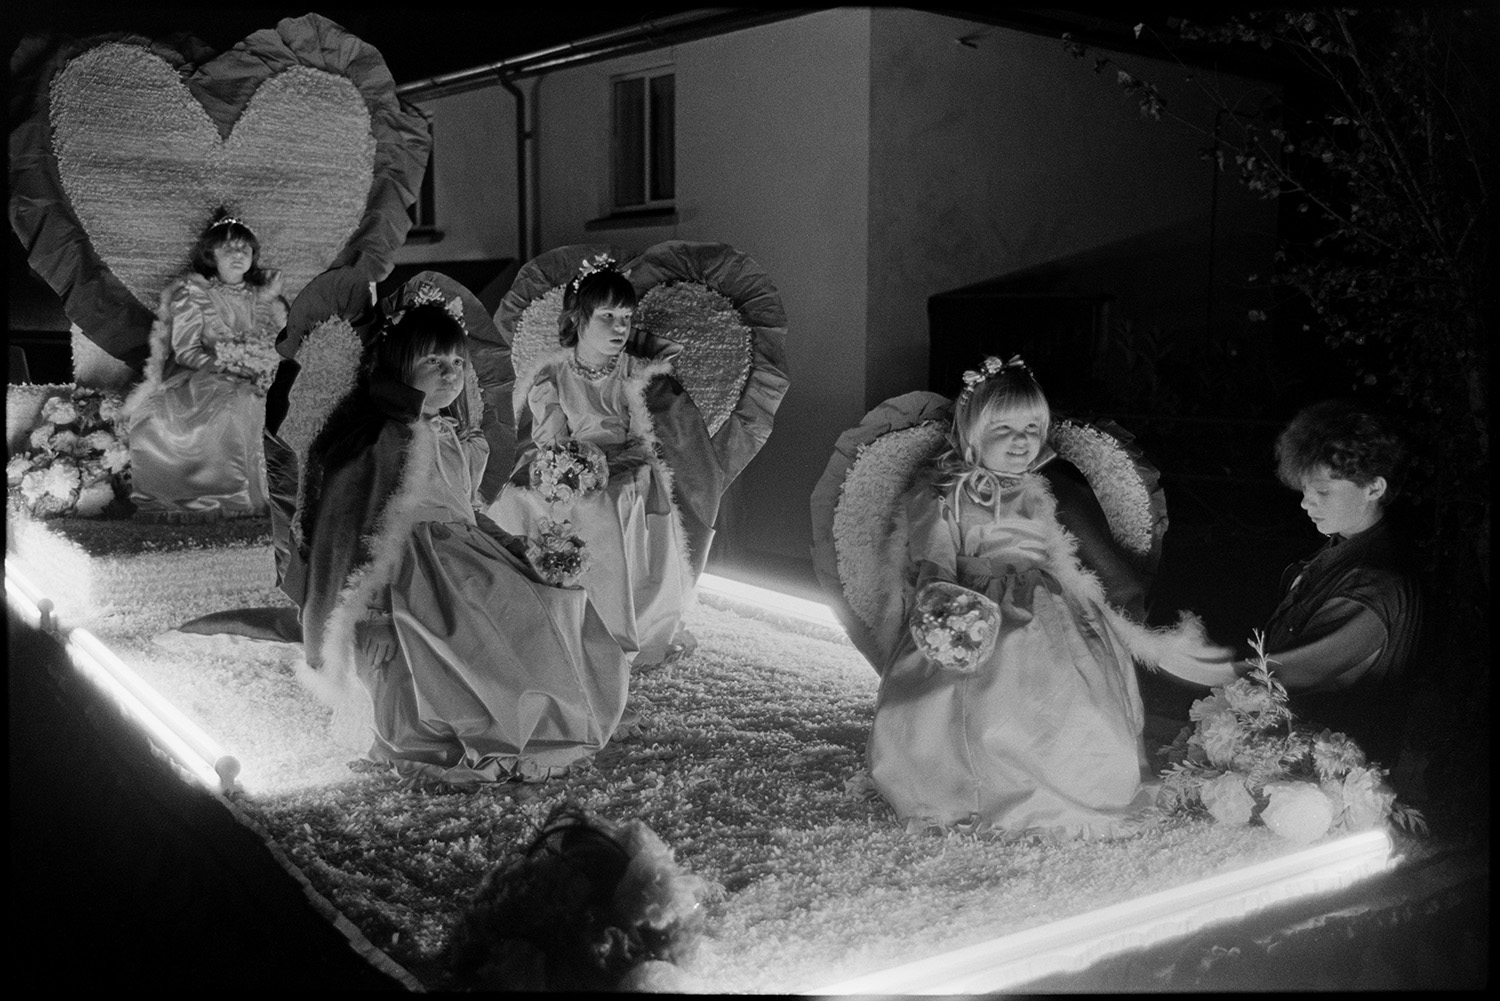 Carnival floats at night, queen and attendants, fancy dress, with burning torches.
[A carnival float during the evening procession at Dolton Carnival. Four girls in fancy dress sitting on a float decorated with heart shapes and flowers.]